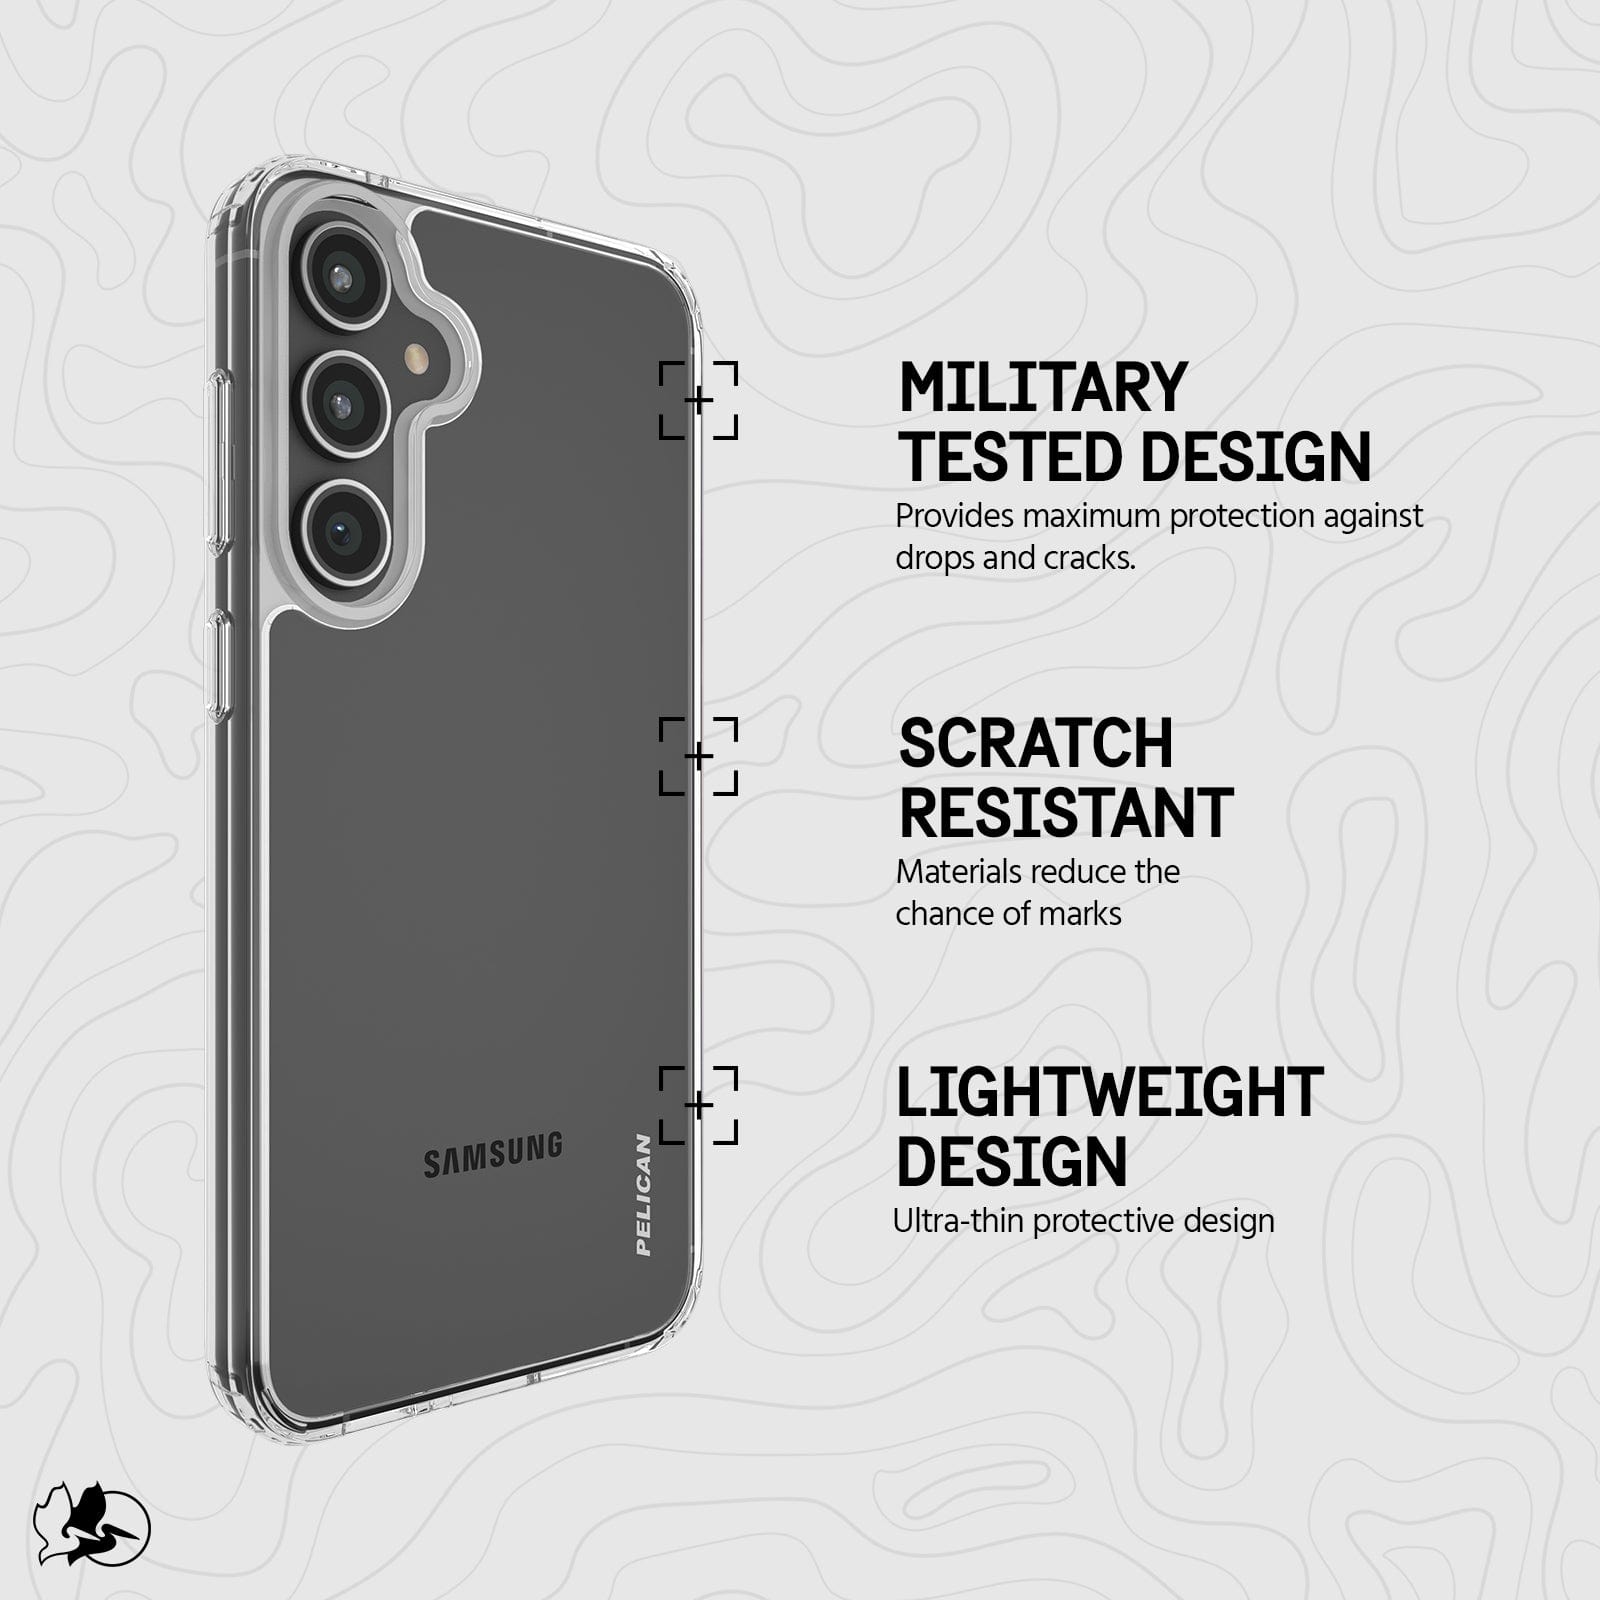 MILITARY TESTED DESIGN. PROVIDES MAXIMUM PROTECTION AGAINST DROPS AND CRACKS. SCRATCH RESISTANT MATERIALS REDUCE THE CHANCE OF MARKS. LIGHTWEIGHT DESIGN ULTRA THIN PROTECTIVE DESIGN